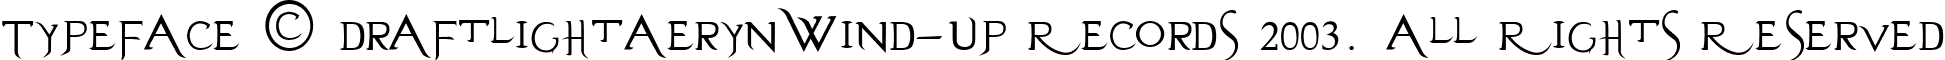 Typeface © DraftlightAerynWind-Up Records 2003. All Rights Reserved font - evanescent_p.ttf